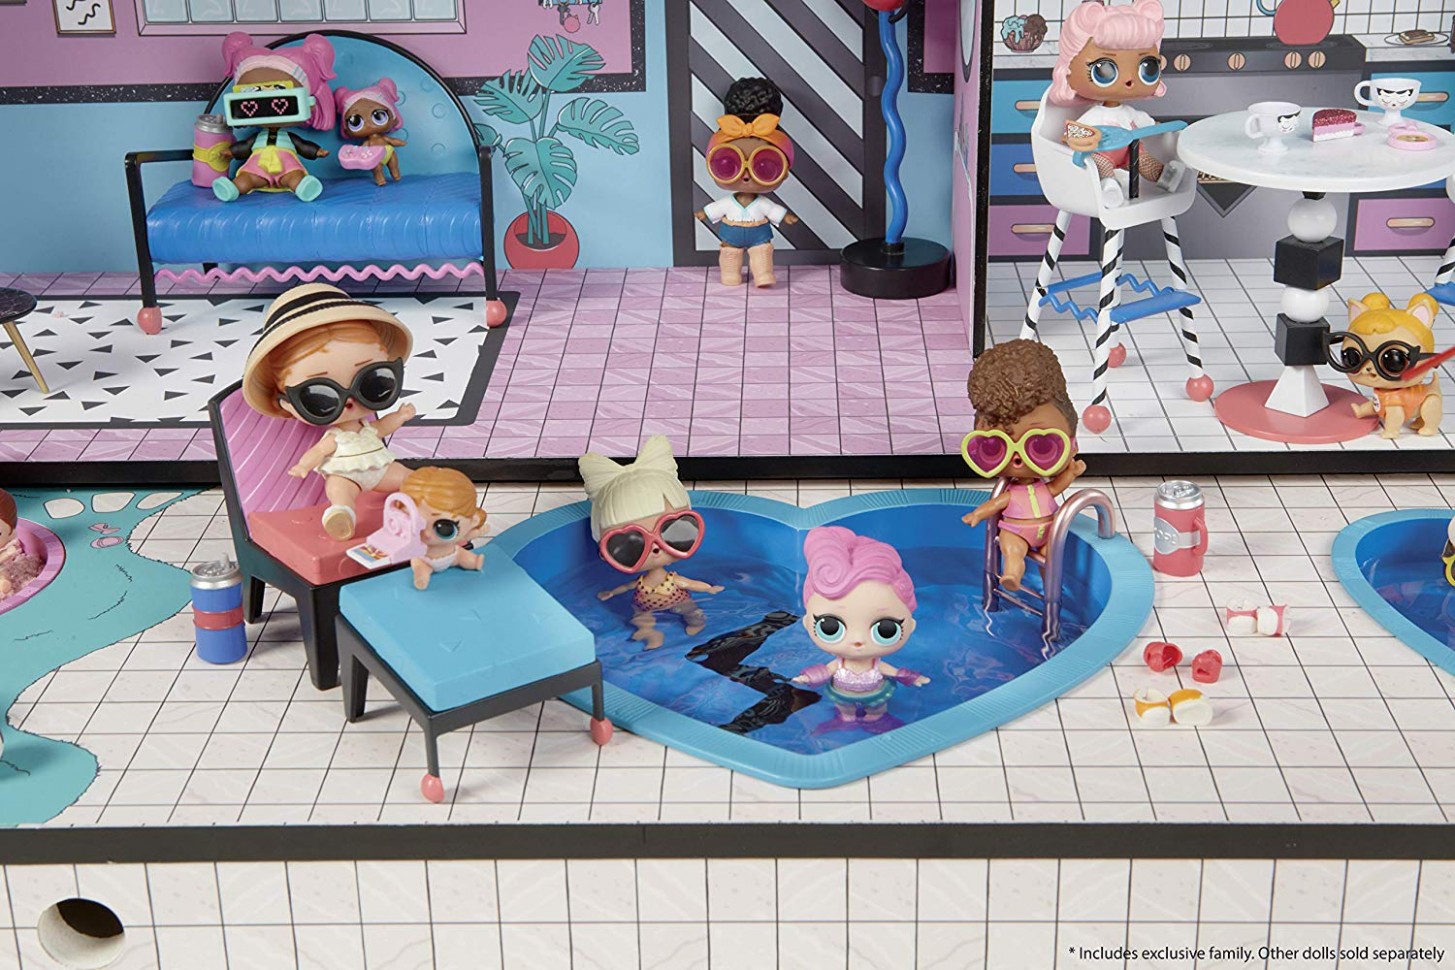 Lol Surprise Doll House Guide: 7 Surprises, Dolls, And More ..